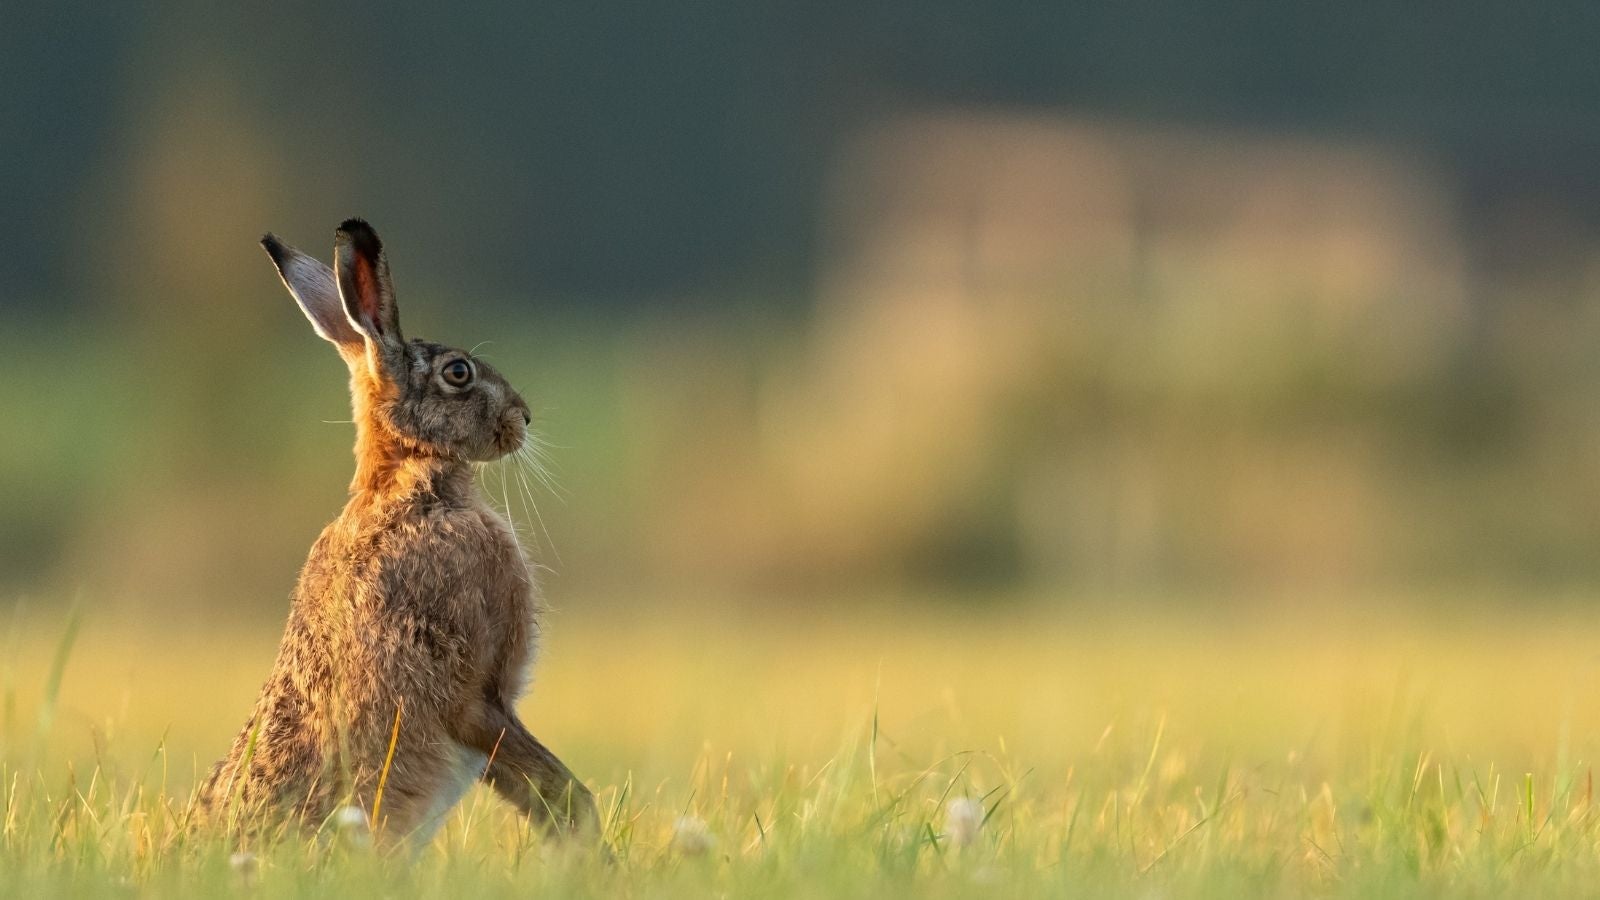 Hare stood in field of grass 